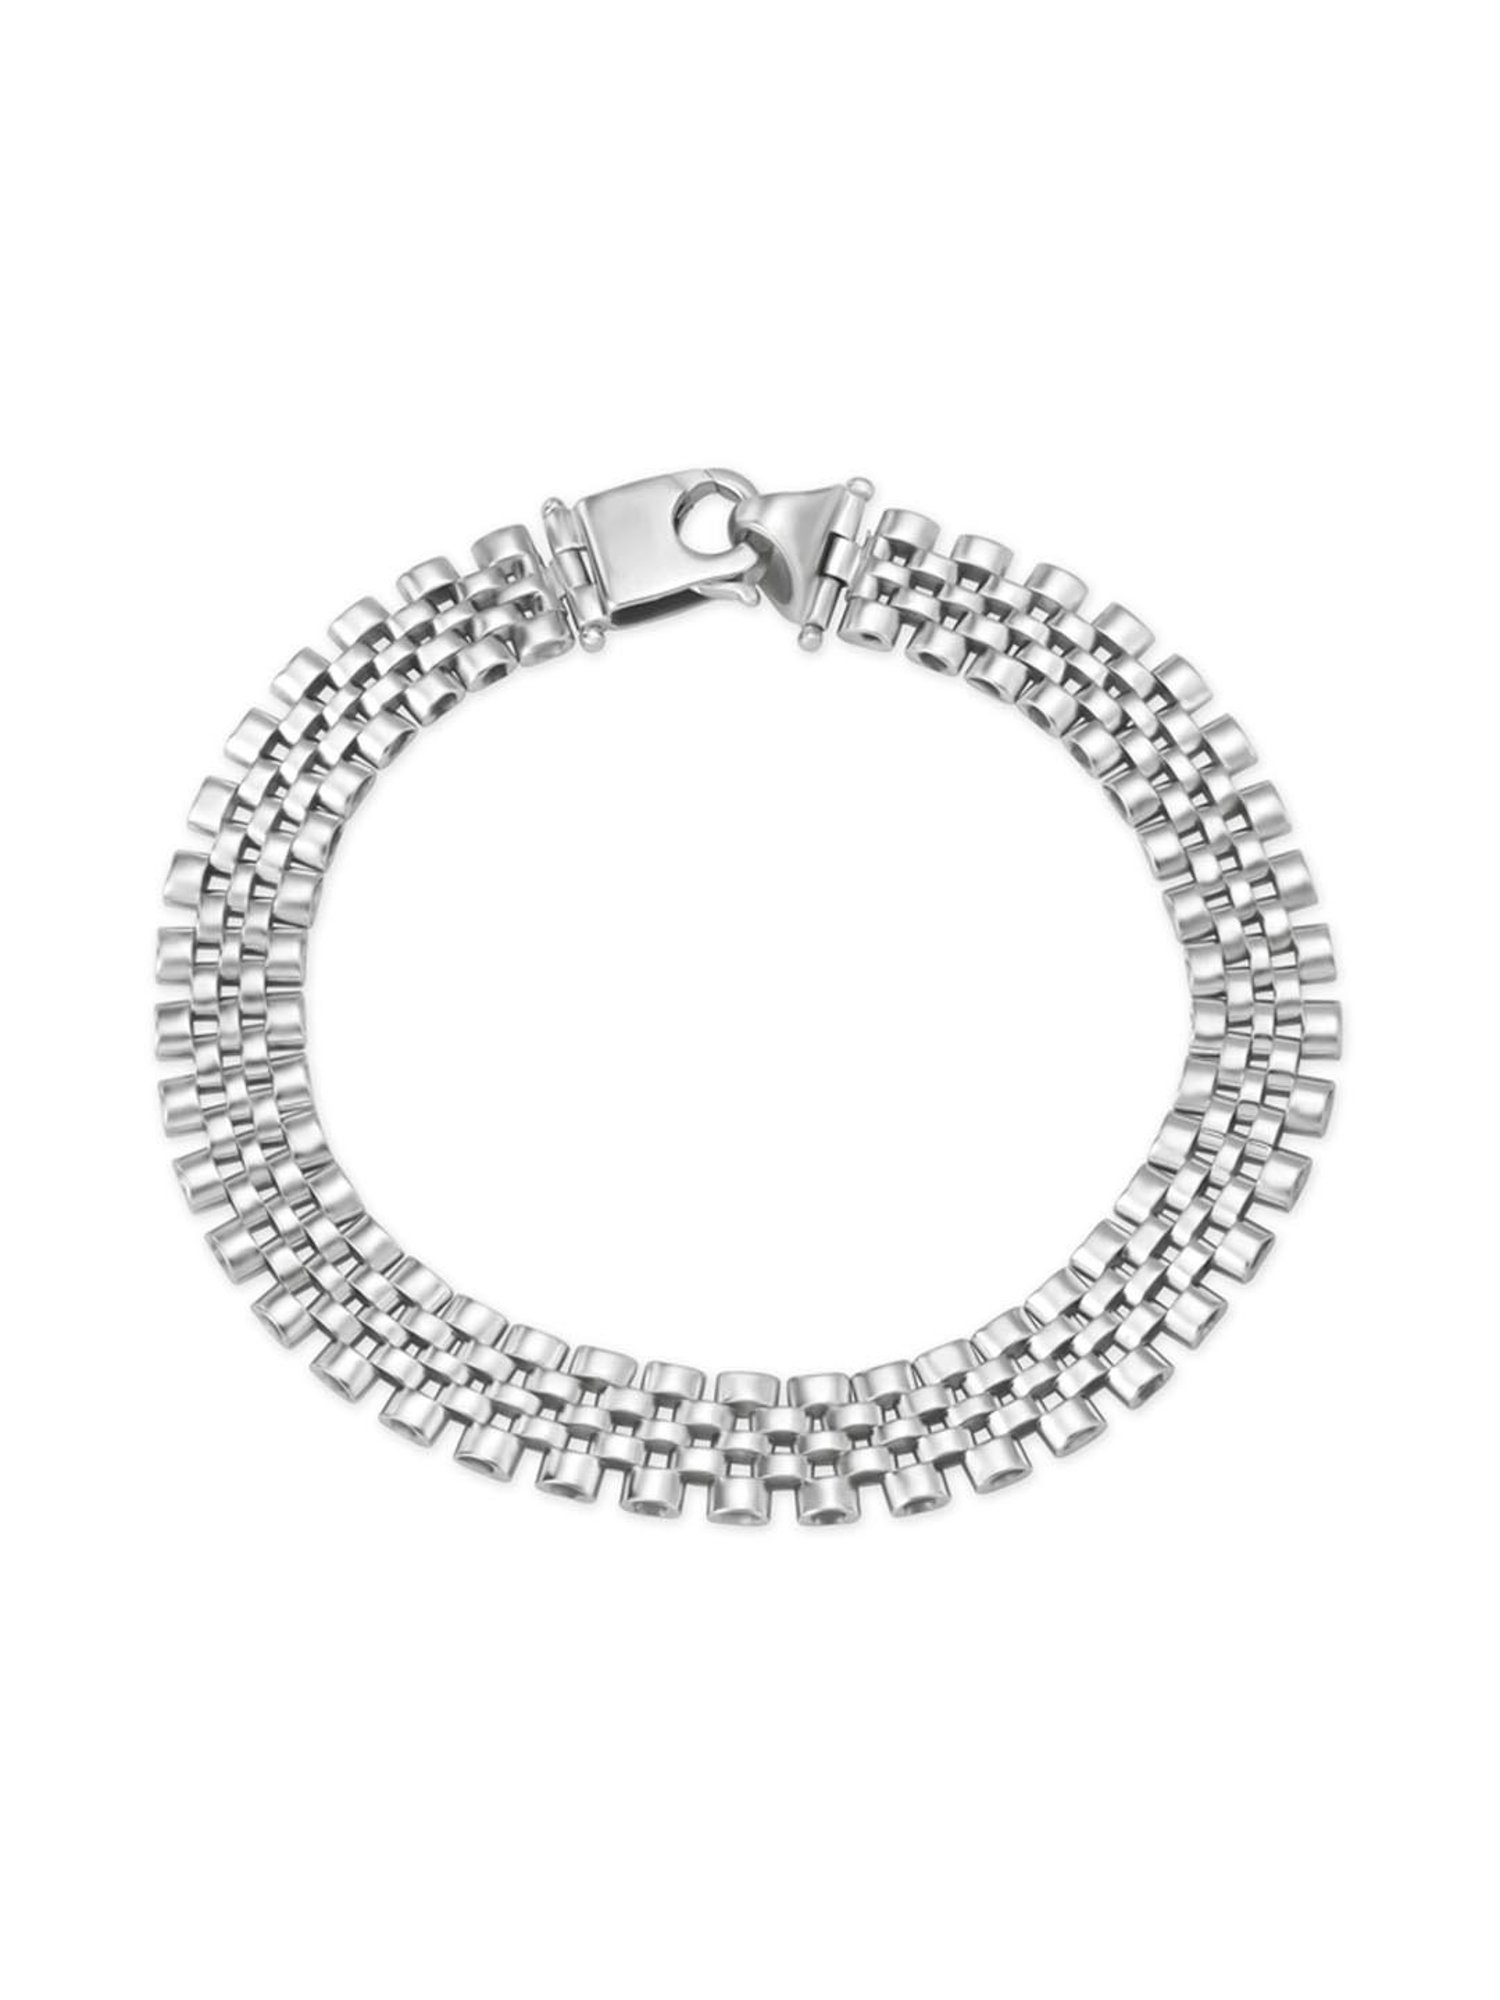 Mia by Tanishq 92.5 Silver Beads here now silver anklet : Amazon.in:  Jewellery